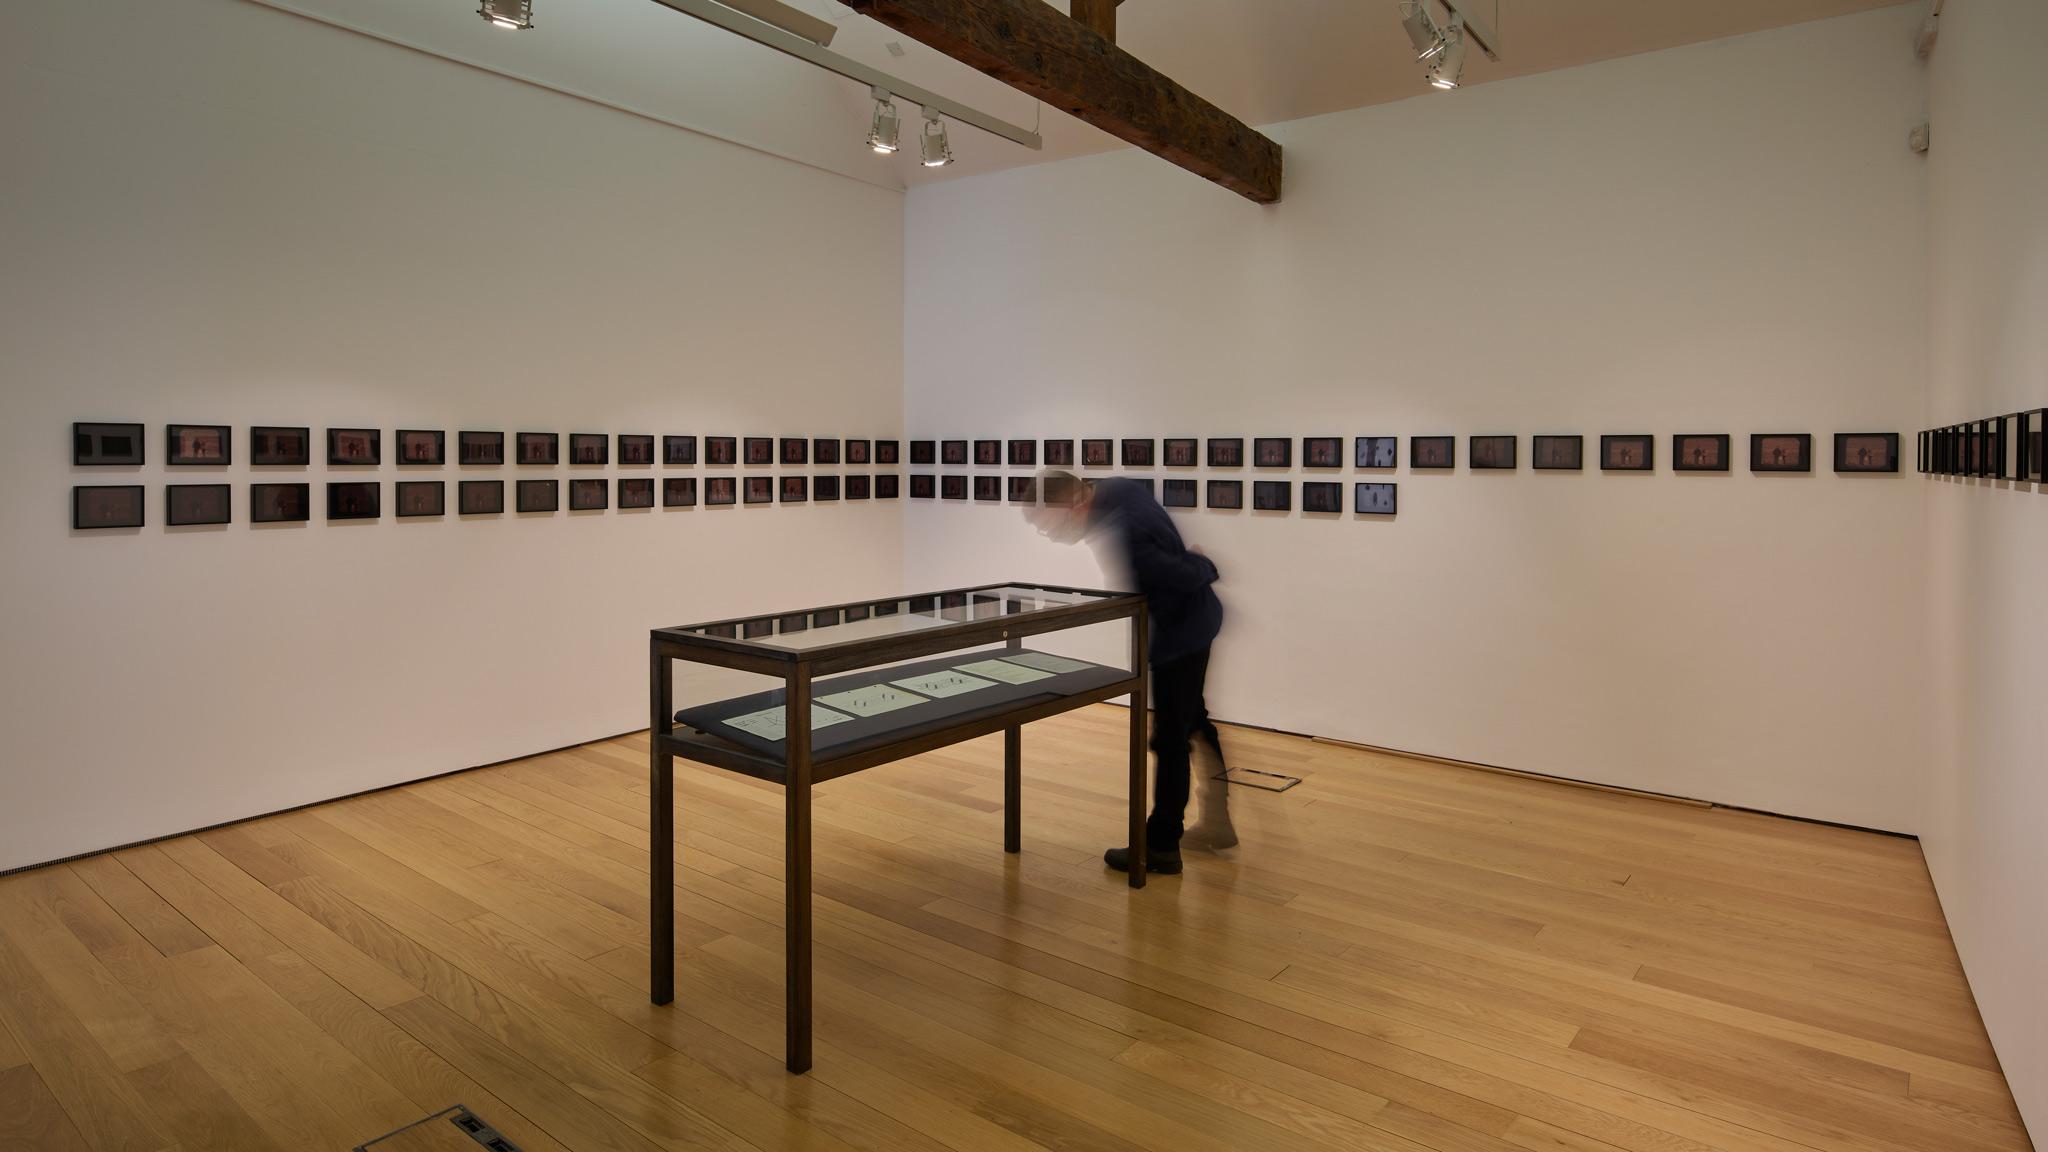 a gallery space with small dark photographs in a line wrapping around the walls and a display case in the center of the room with a person looking down into it.